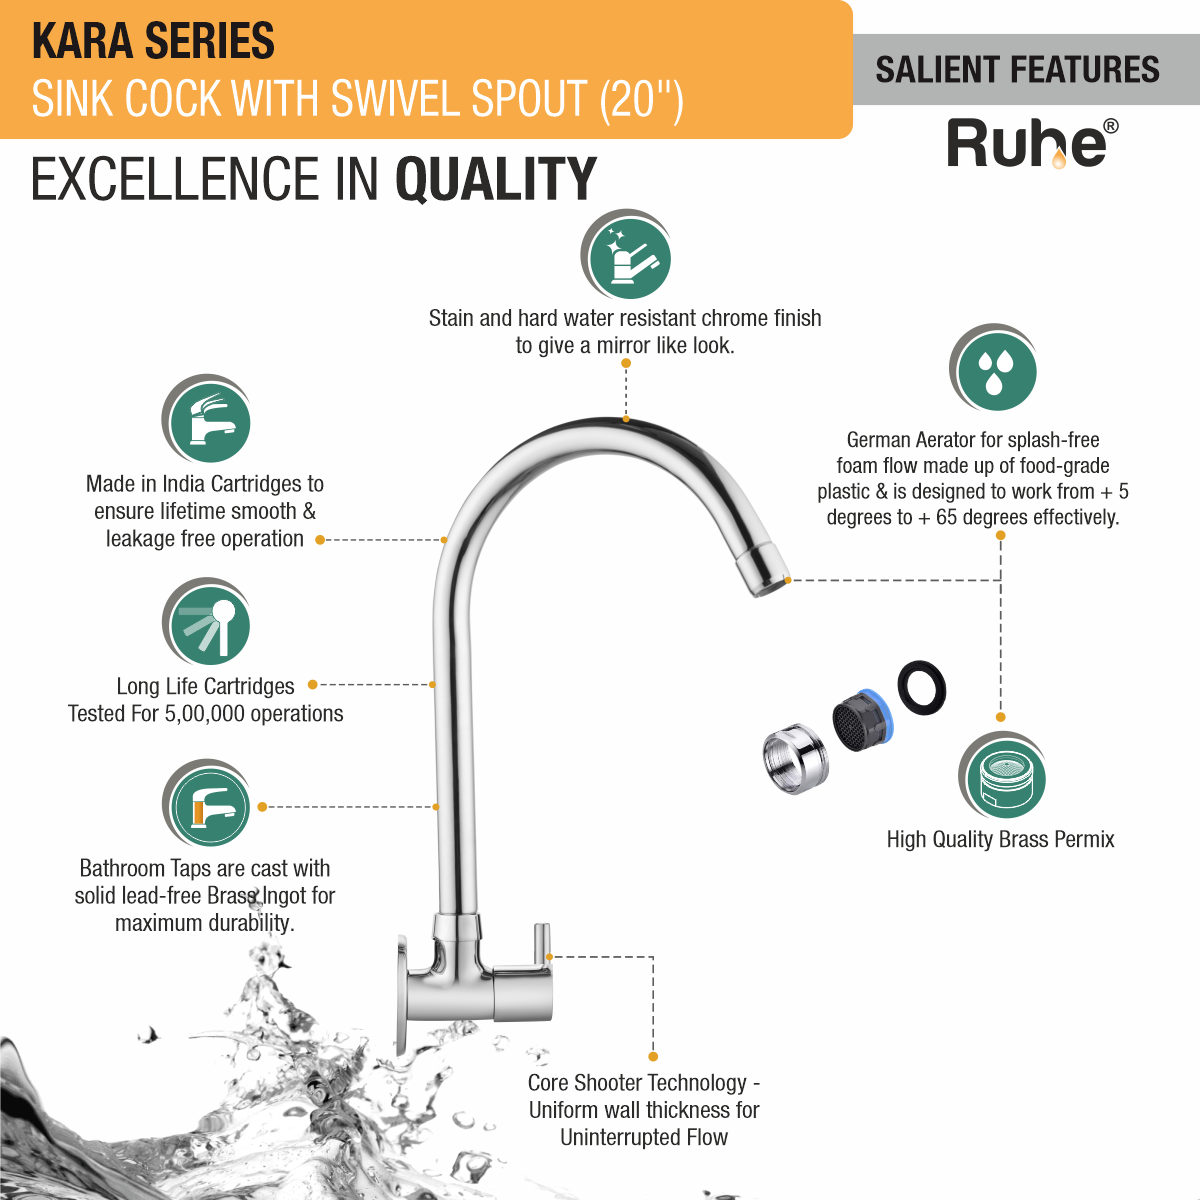 Kara Sink Tap with Large (20 inches) Round Swivel Spout Faucet features and benefits